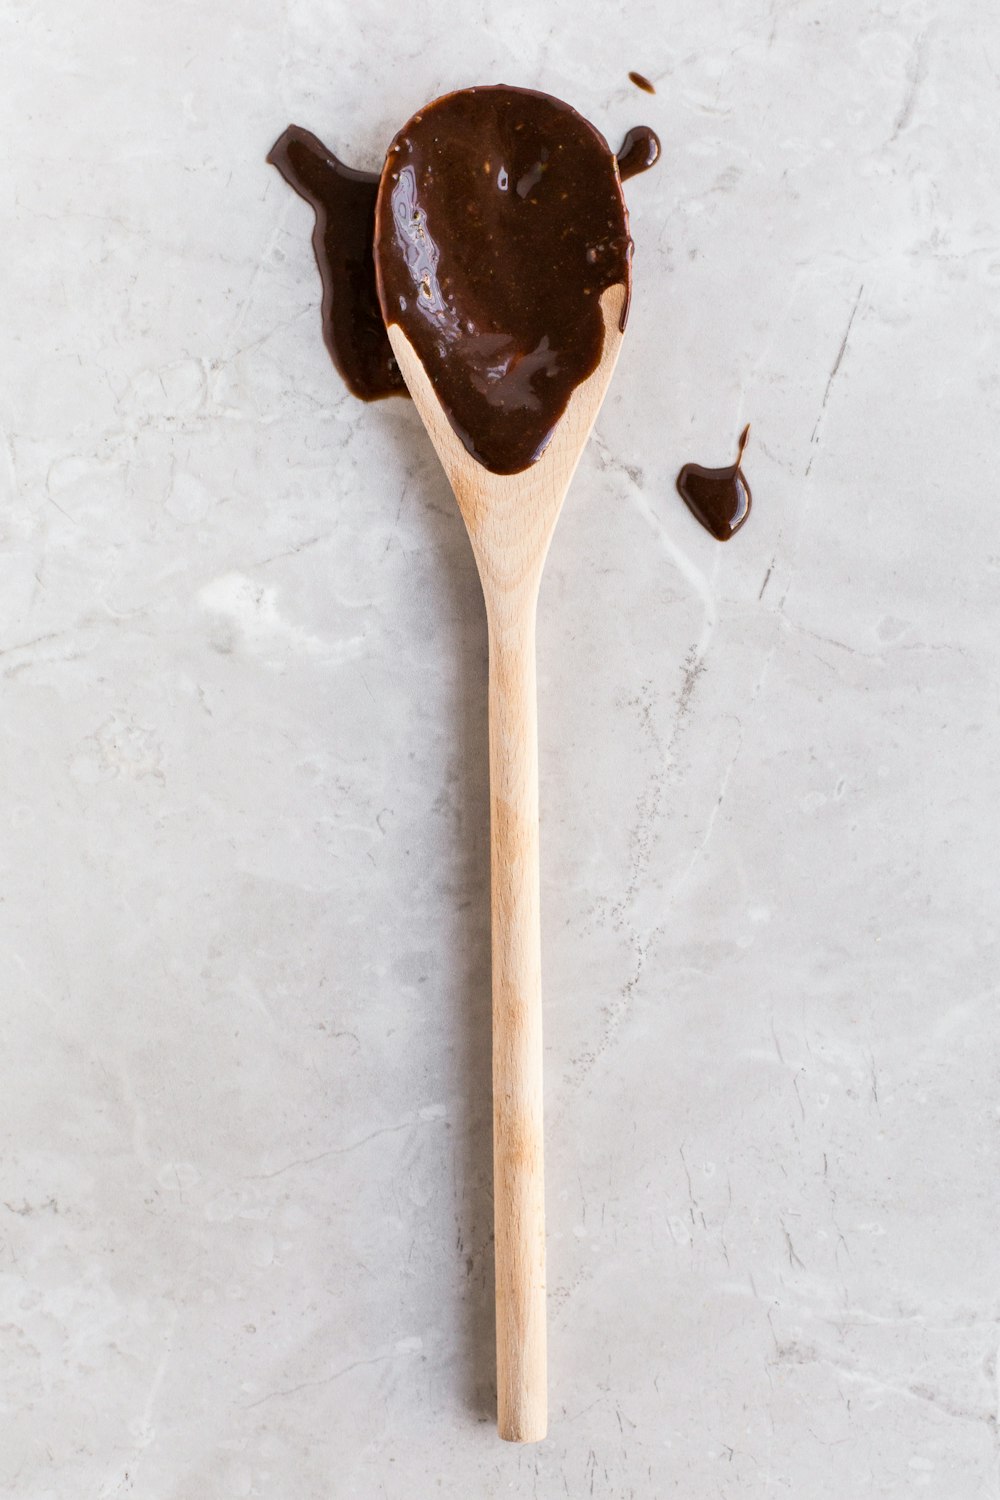 a wooden spoon with a chocolate spread on it